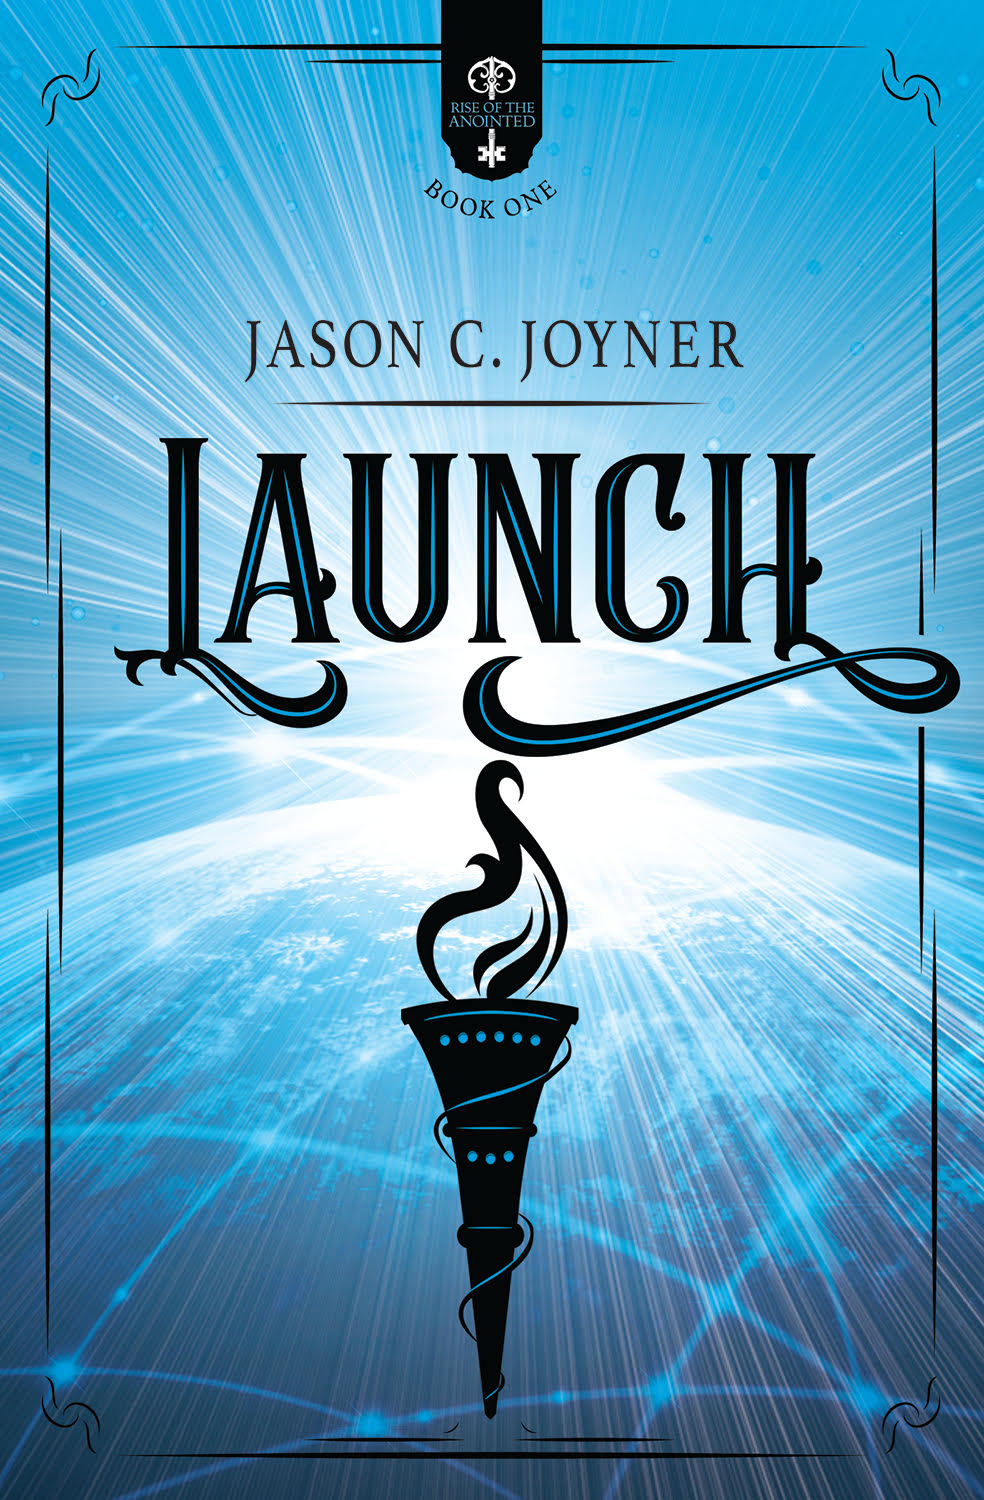 Interview with Jason Joyner, the Author of Launch